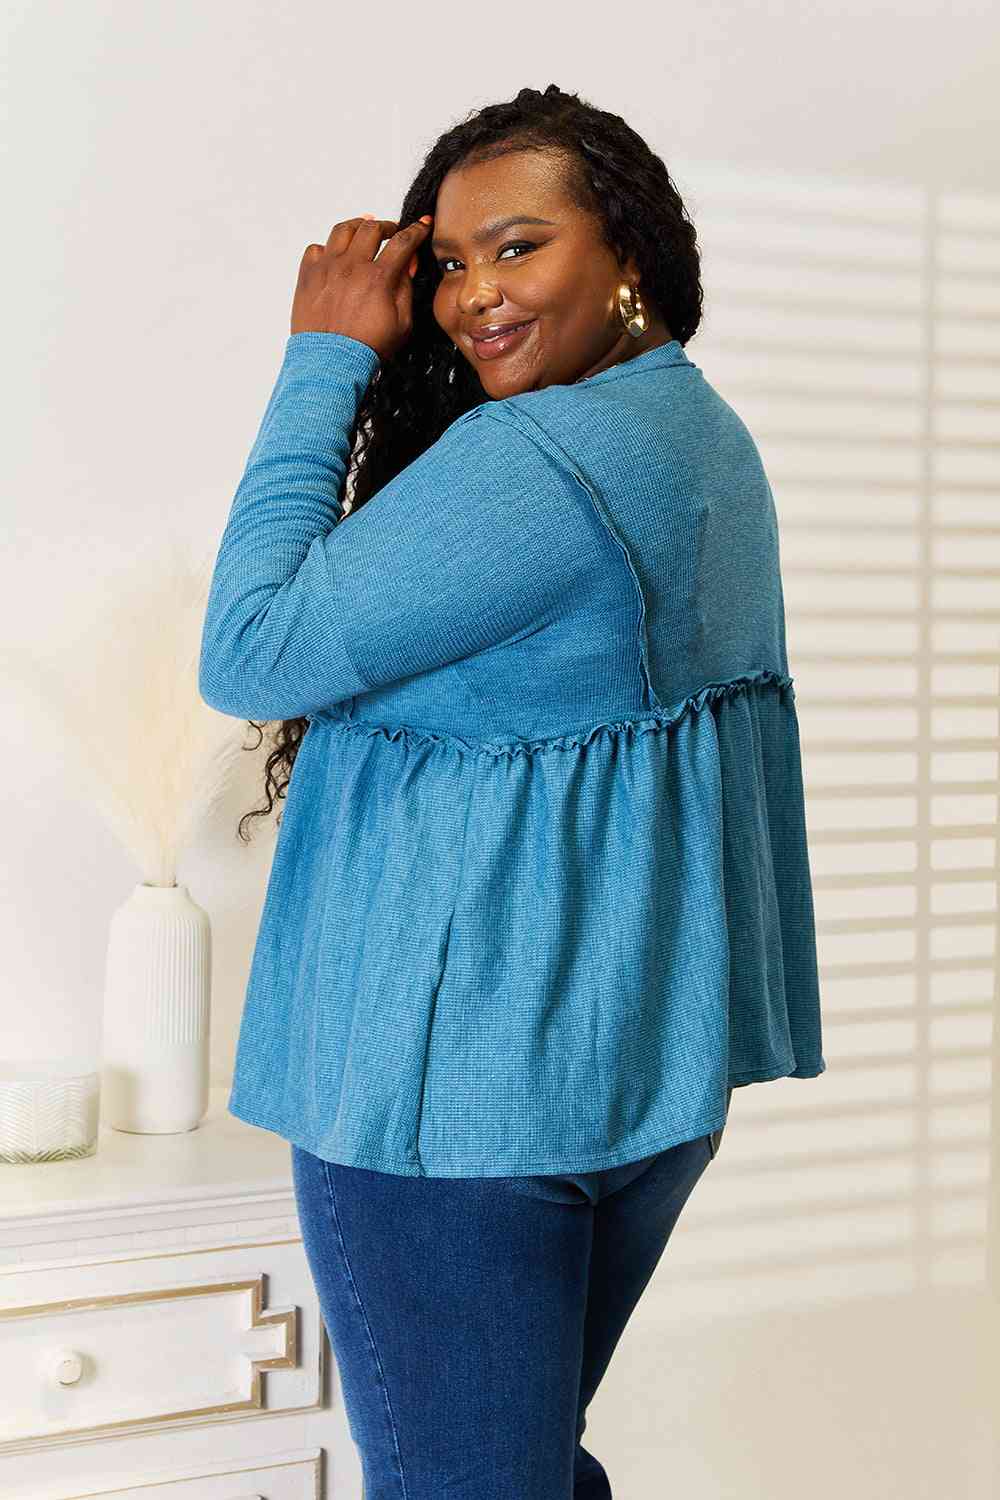 Jade By Jane Full Size Frill Trim Babydoll Blouse-Long Sleeve Tops-Inspired by Justeen-Women's Clothing Boutique in Chicago, Illinois